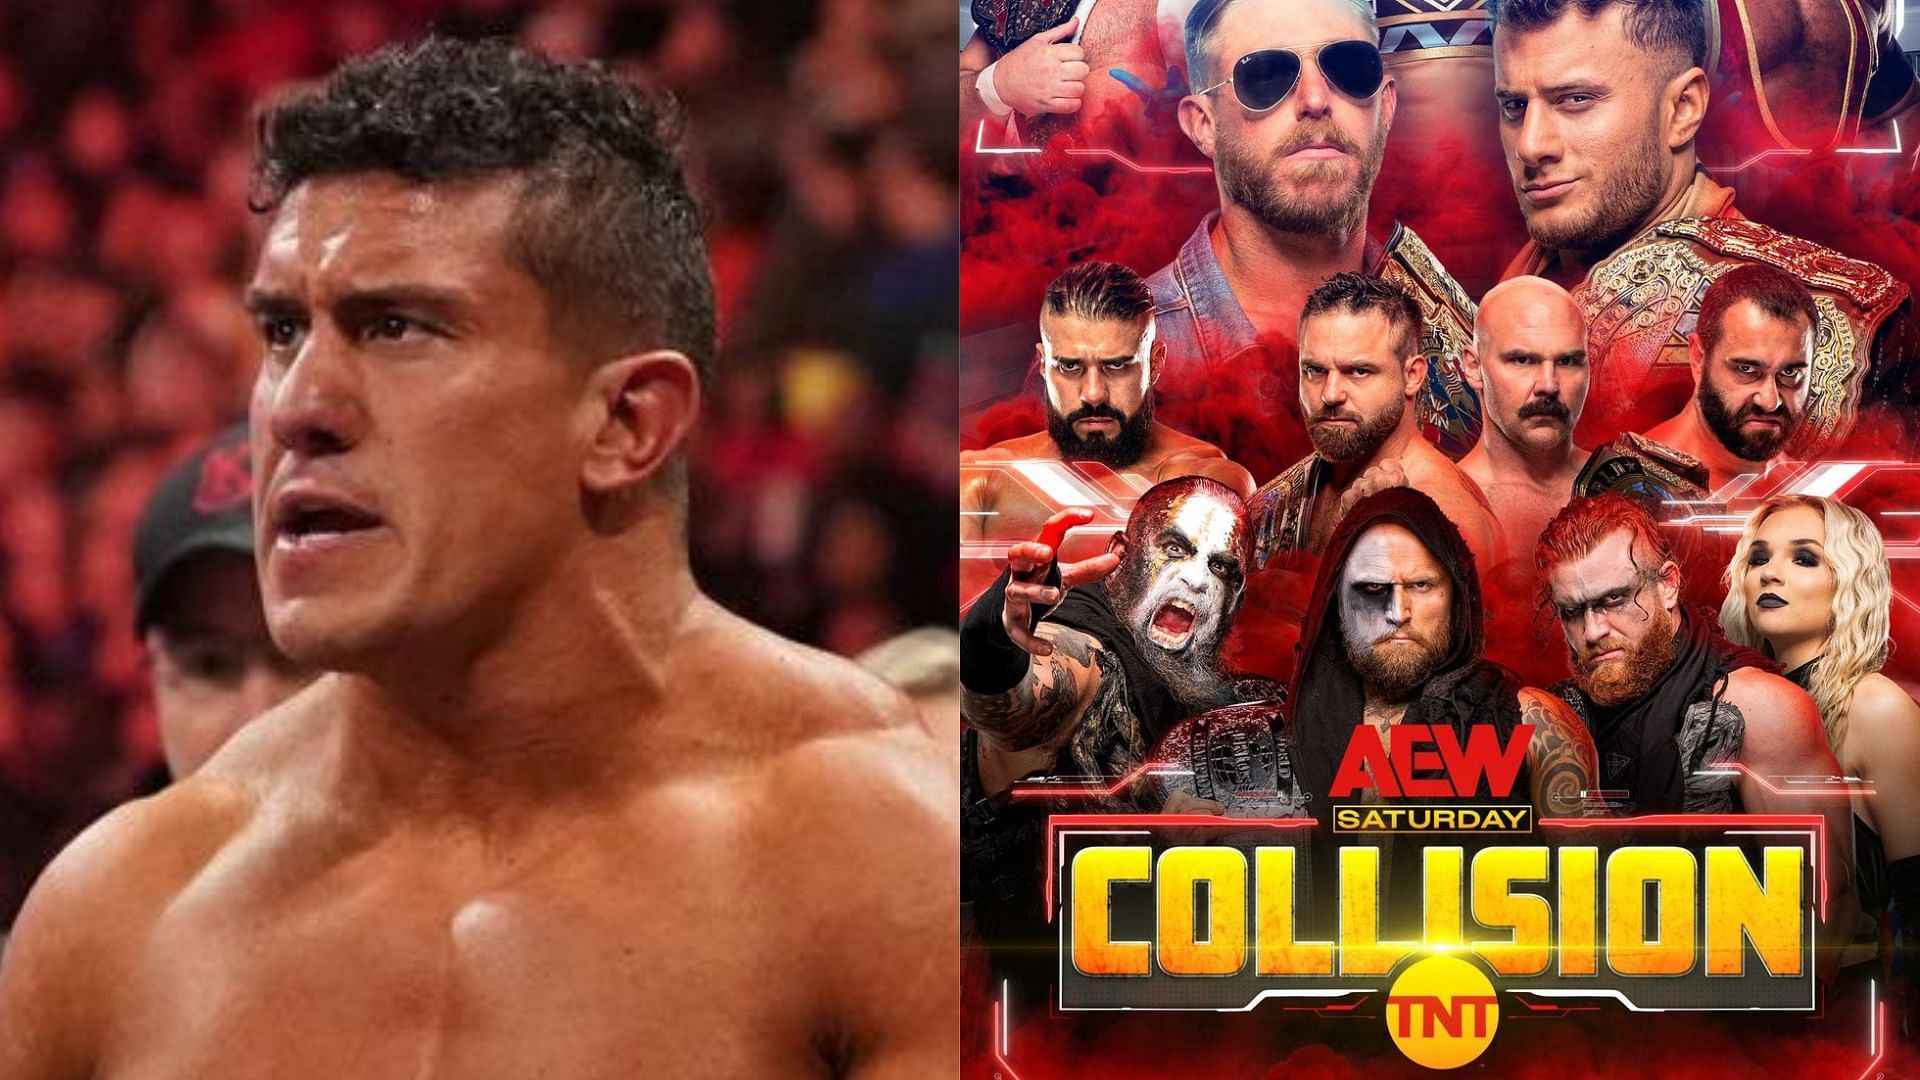 EC3 has explained why AEW Collision is airing on a Saturday